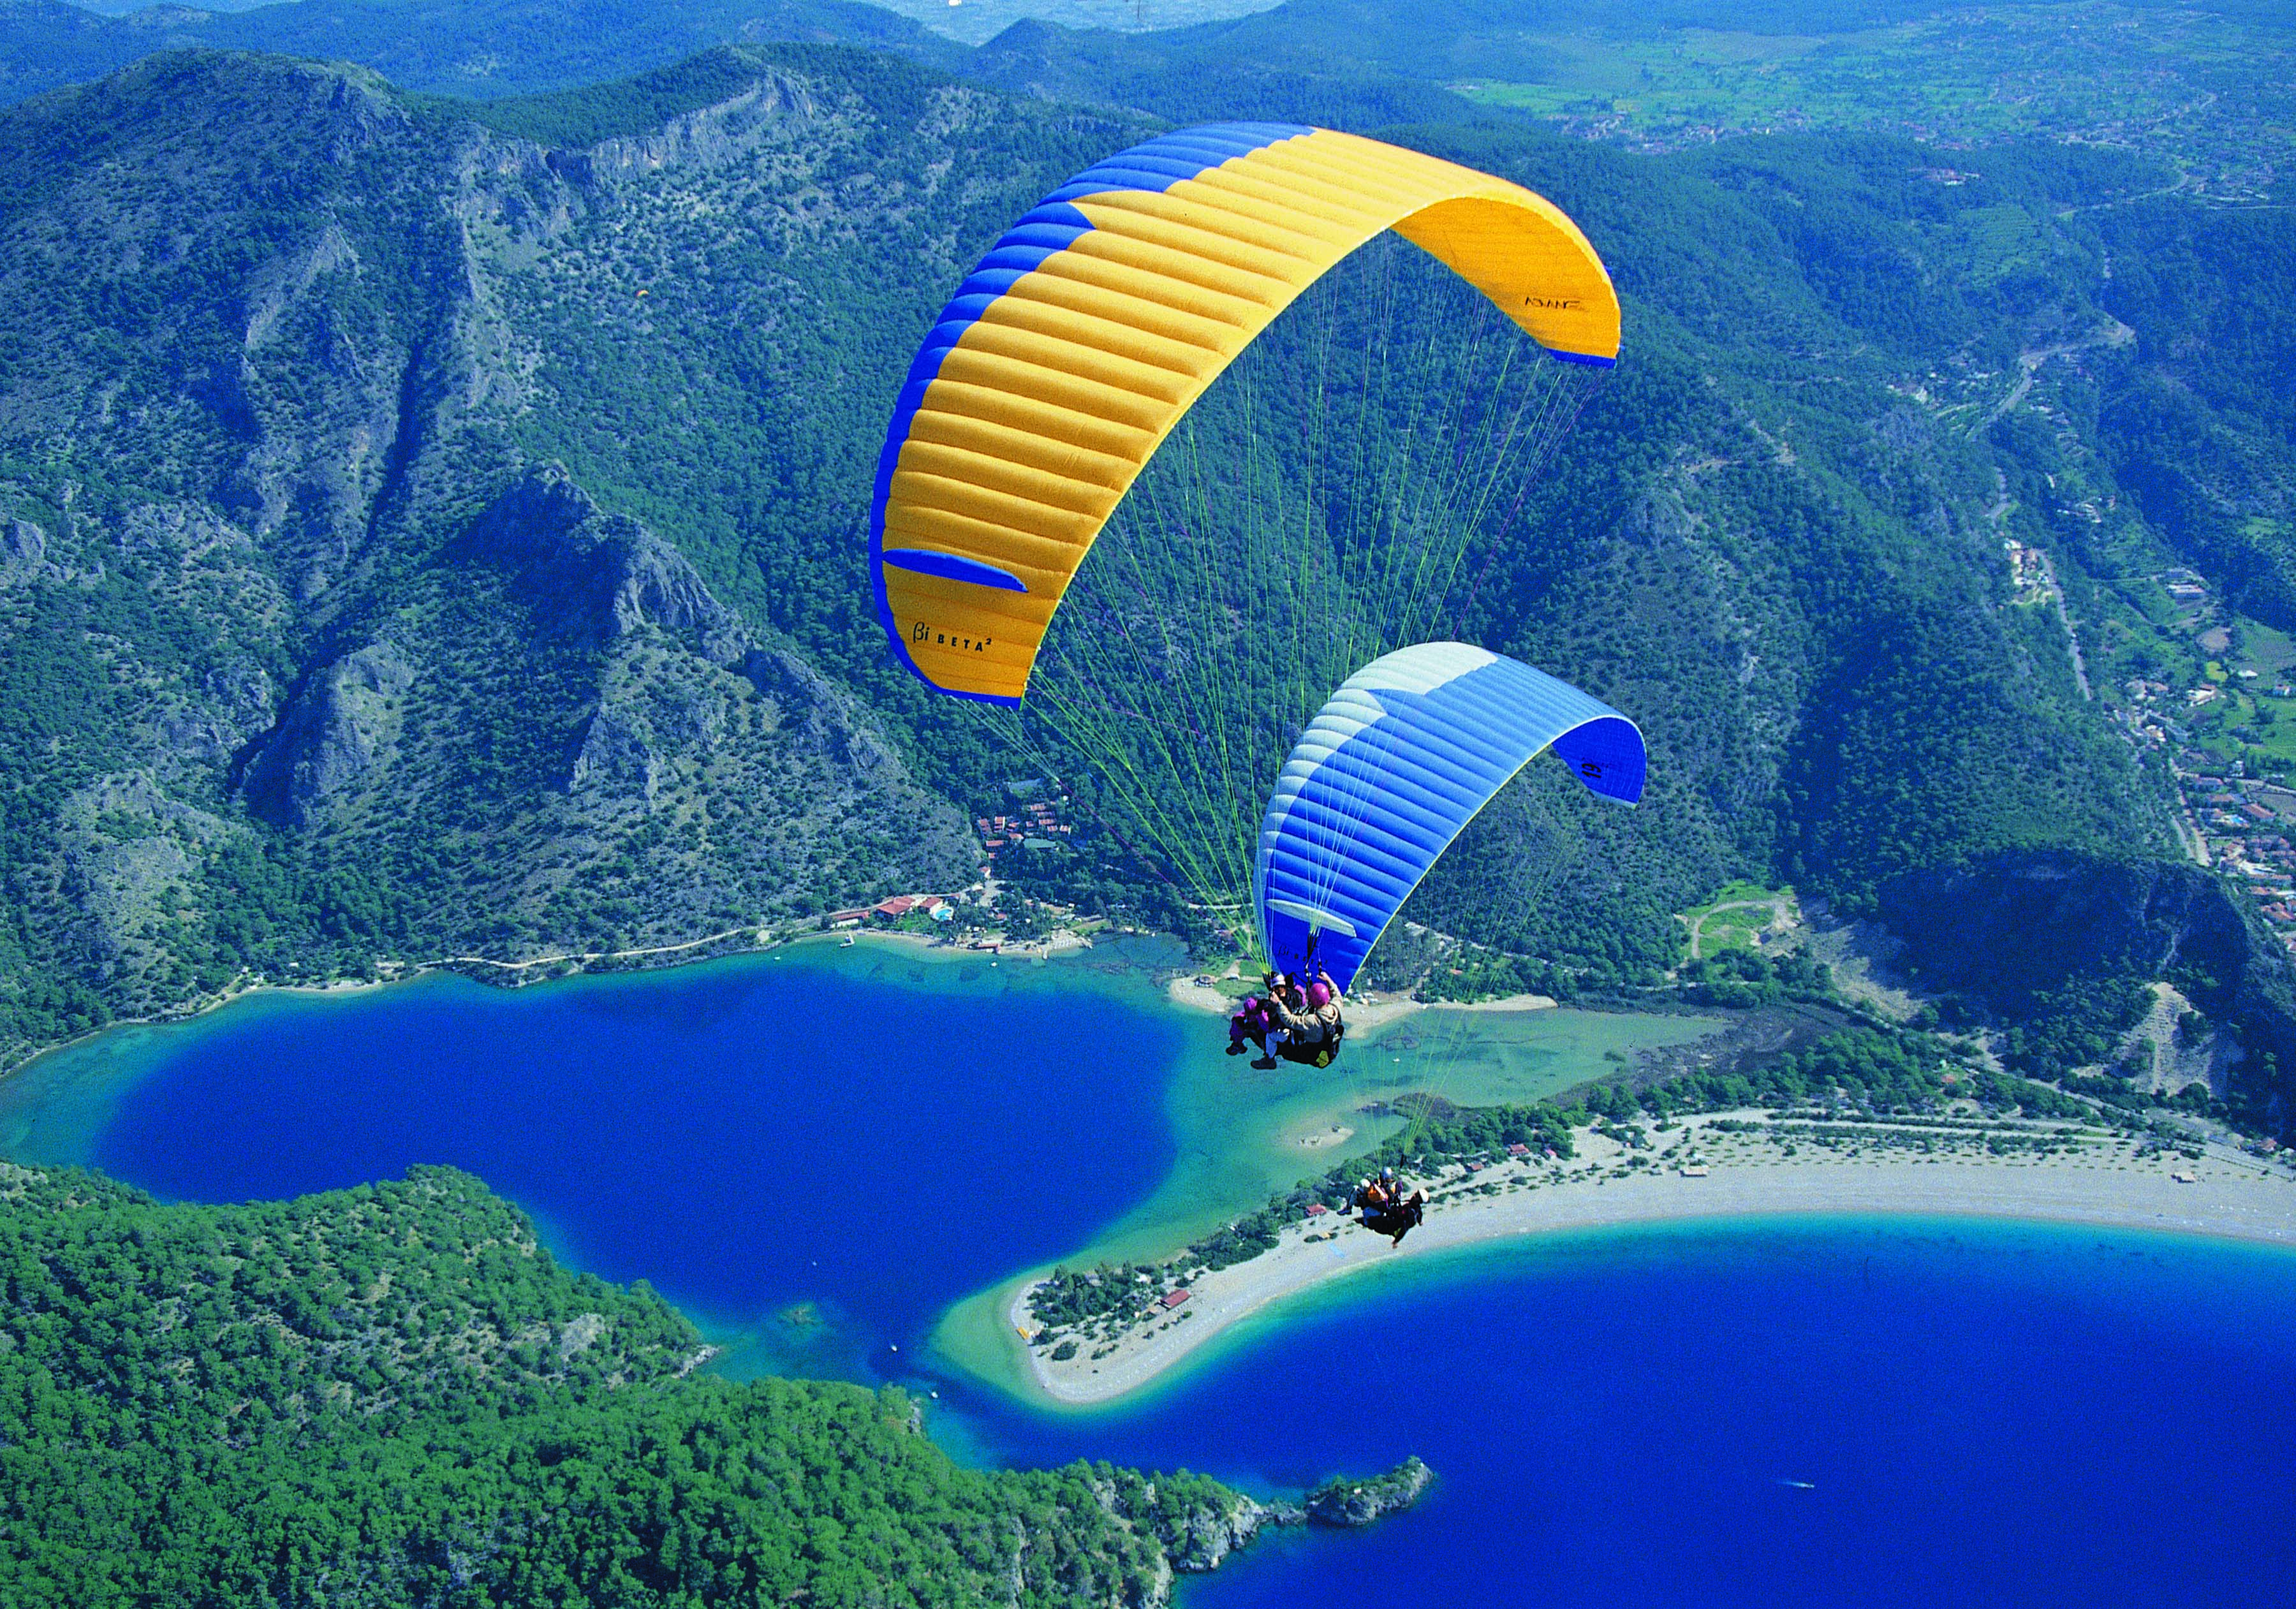 Where can I visit in Fethiye?